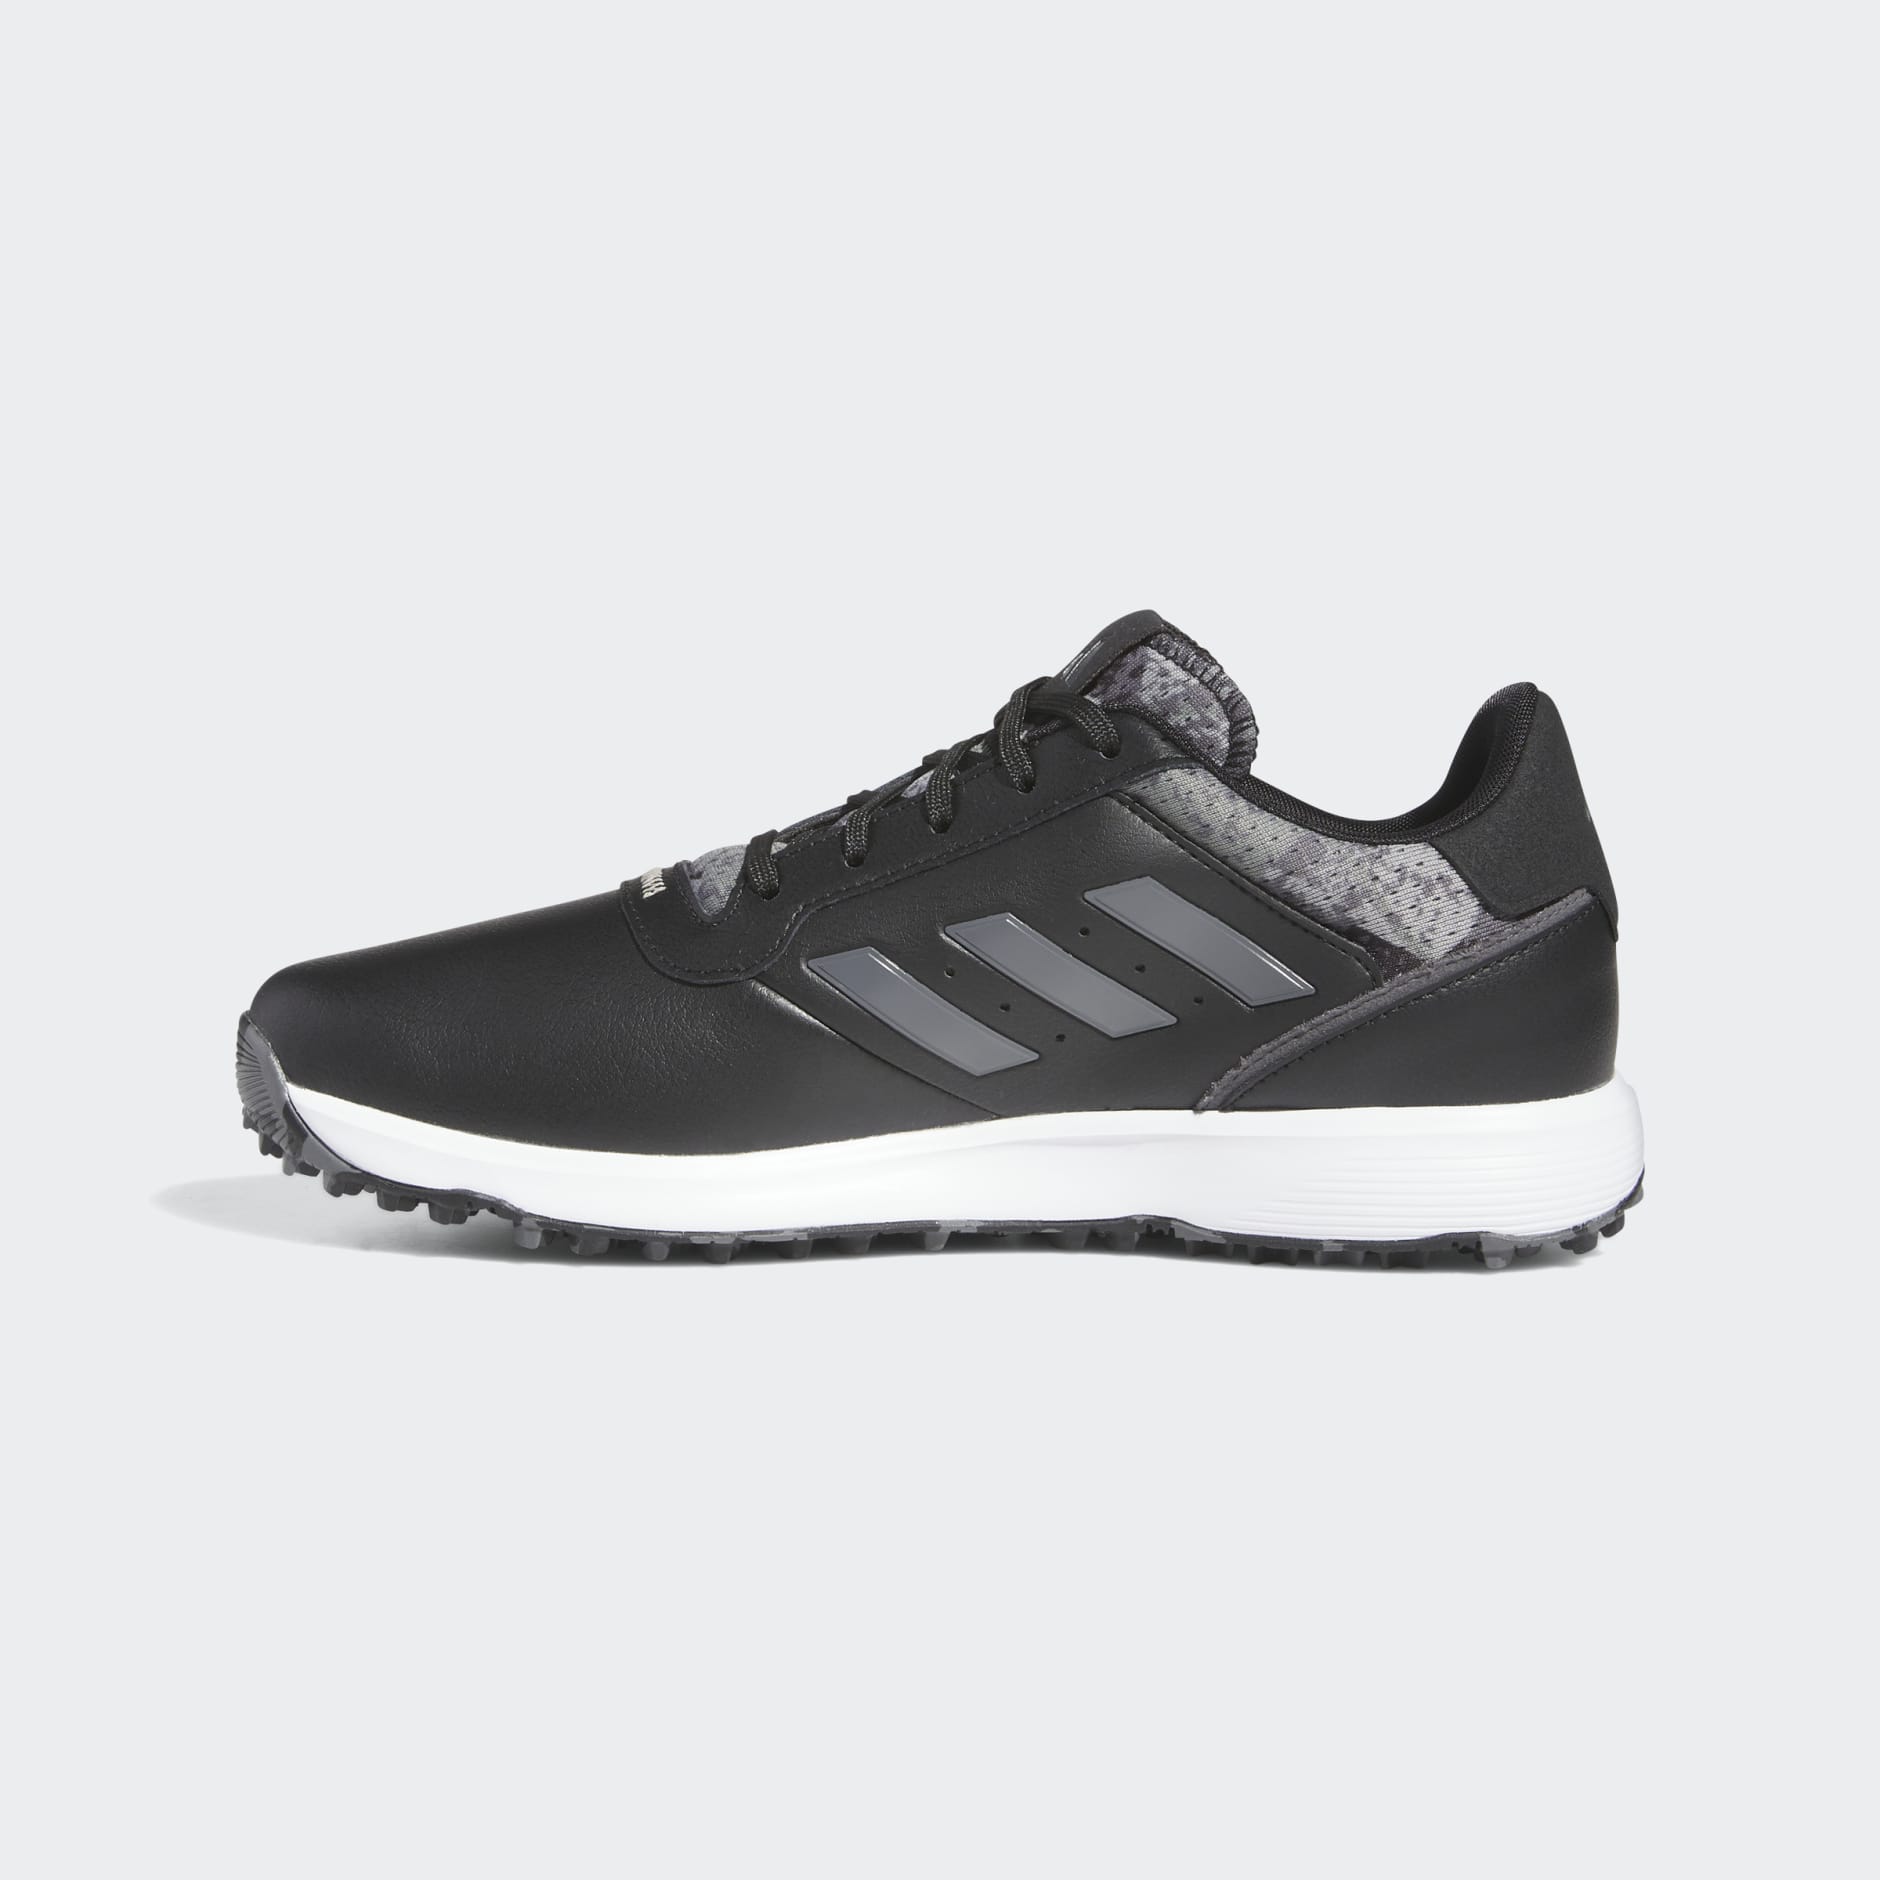 Shoes - S2G SL Golf Shoes - Black | adidas South Africa